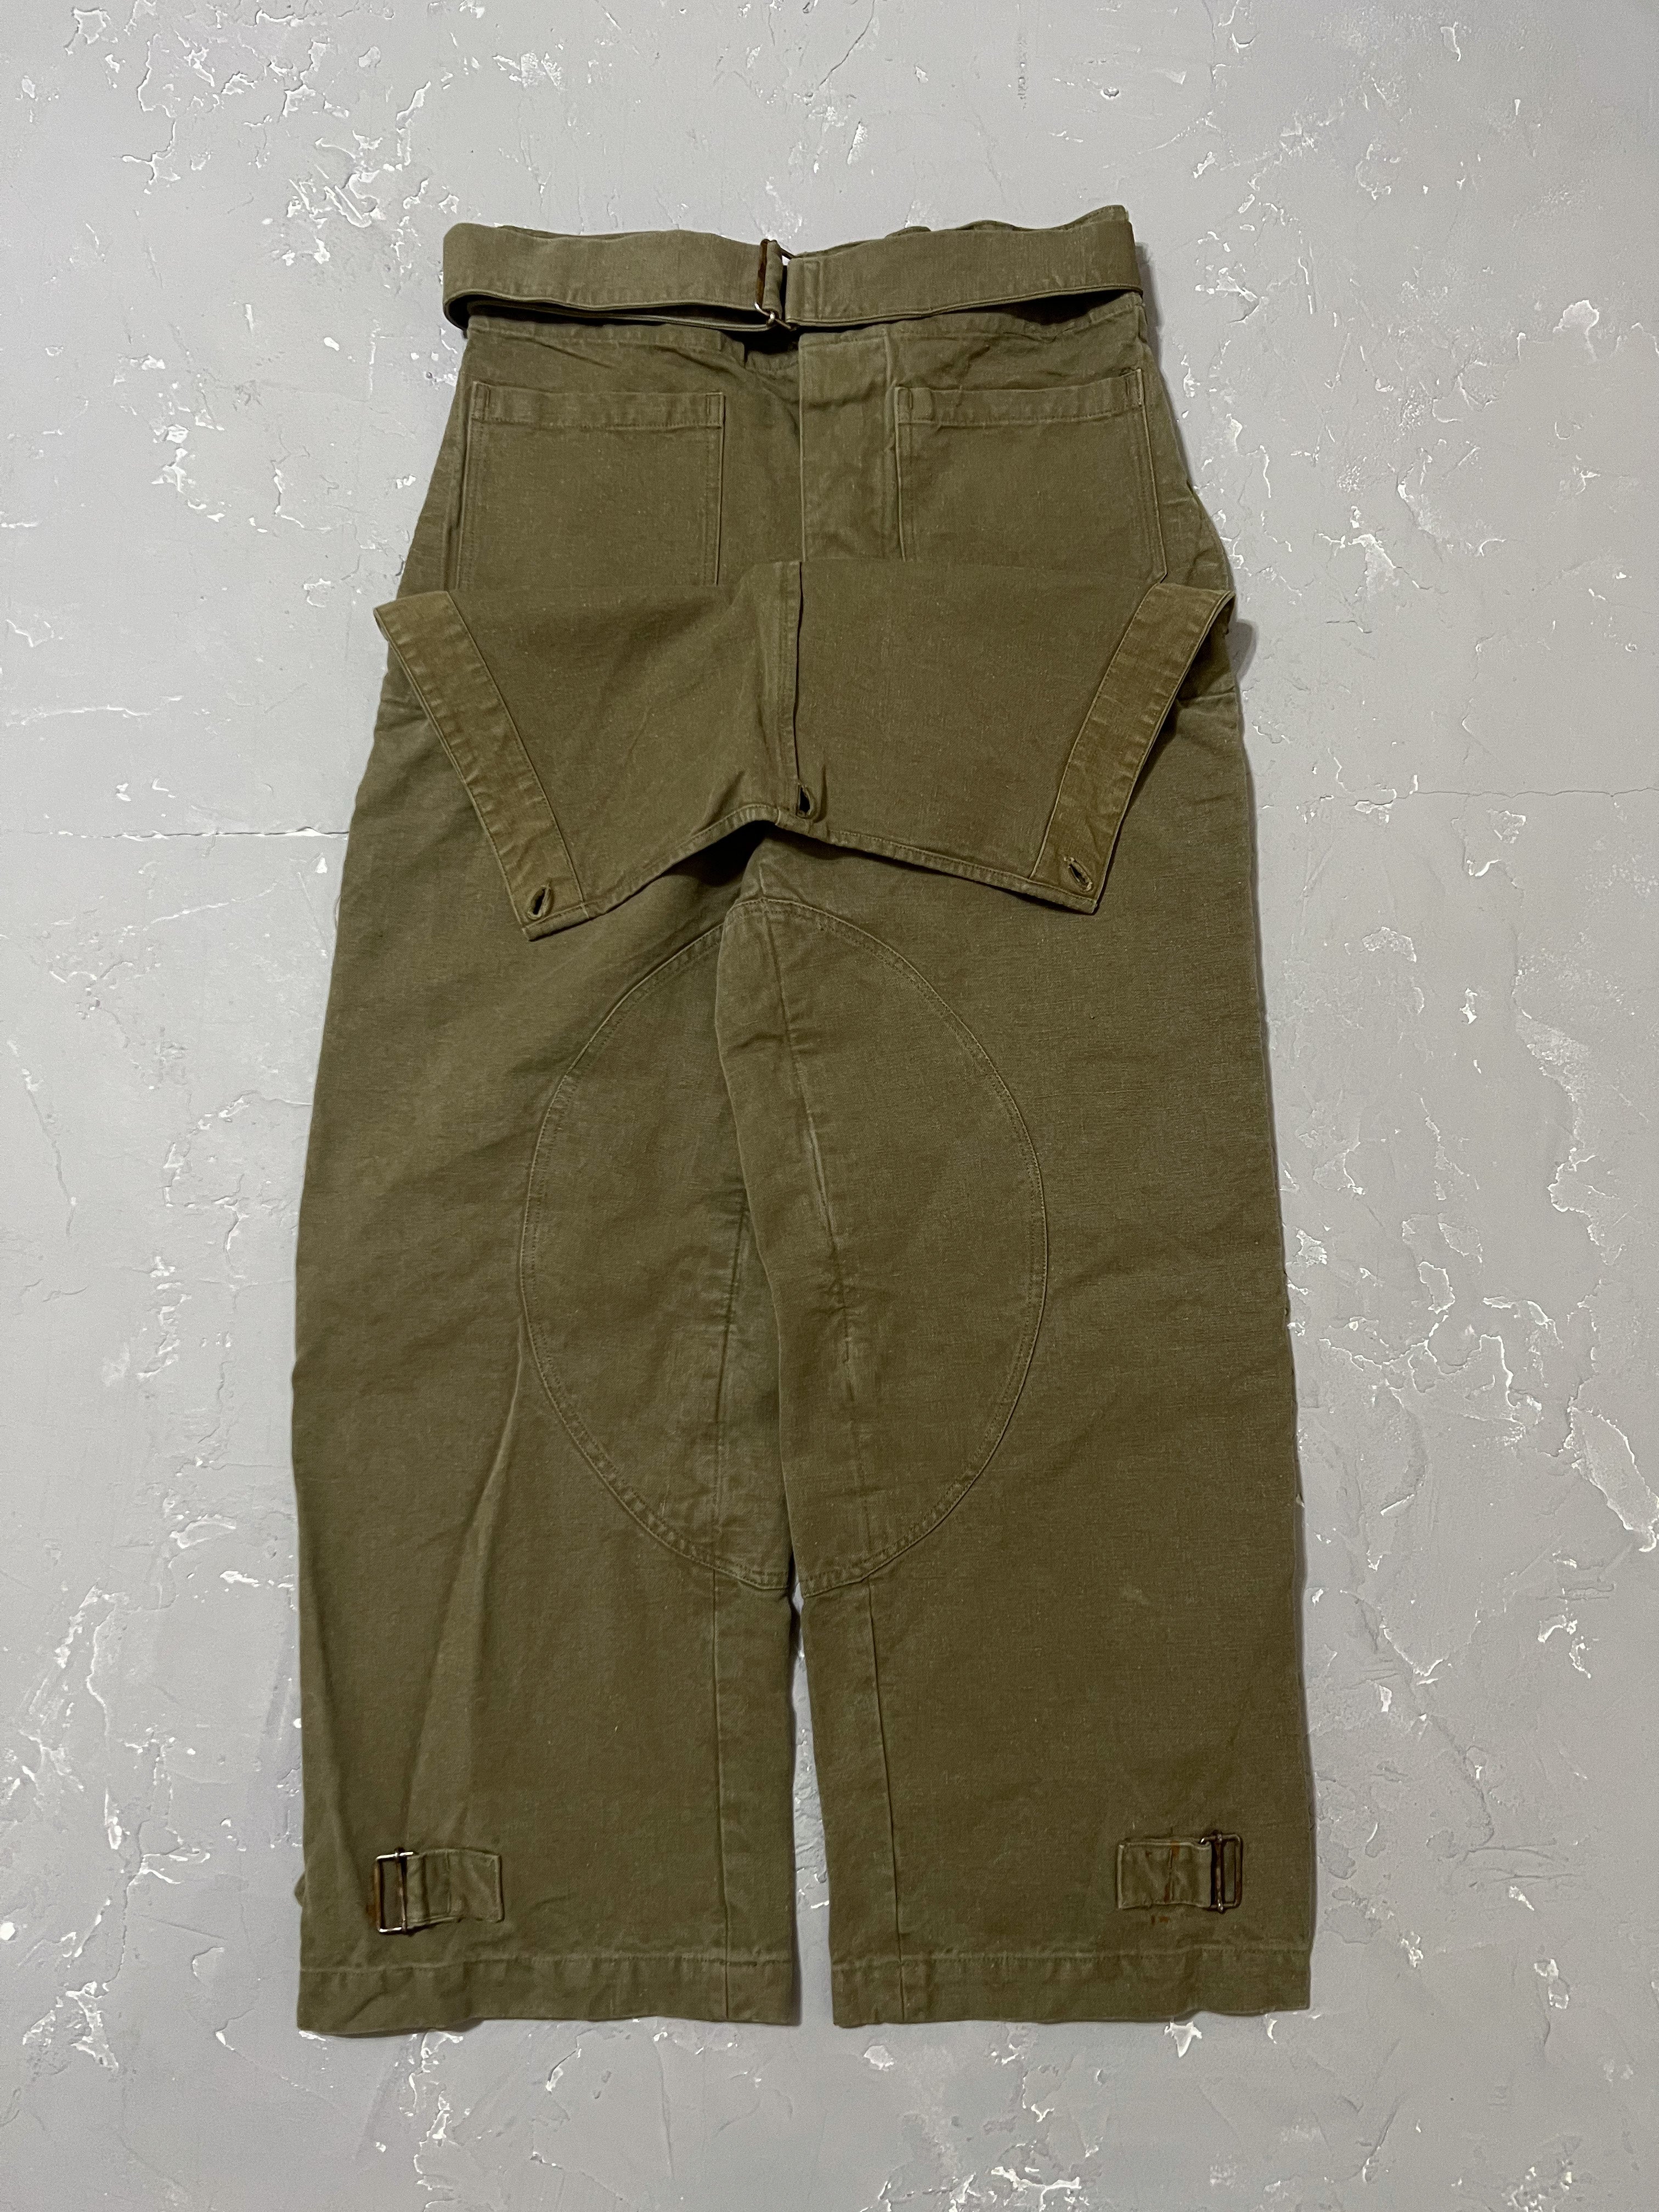 1940s/50s French Army Dispatch Motorcycle Pants [26-34 x 30]